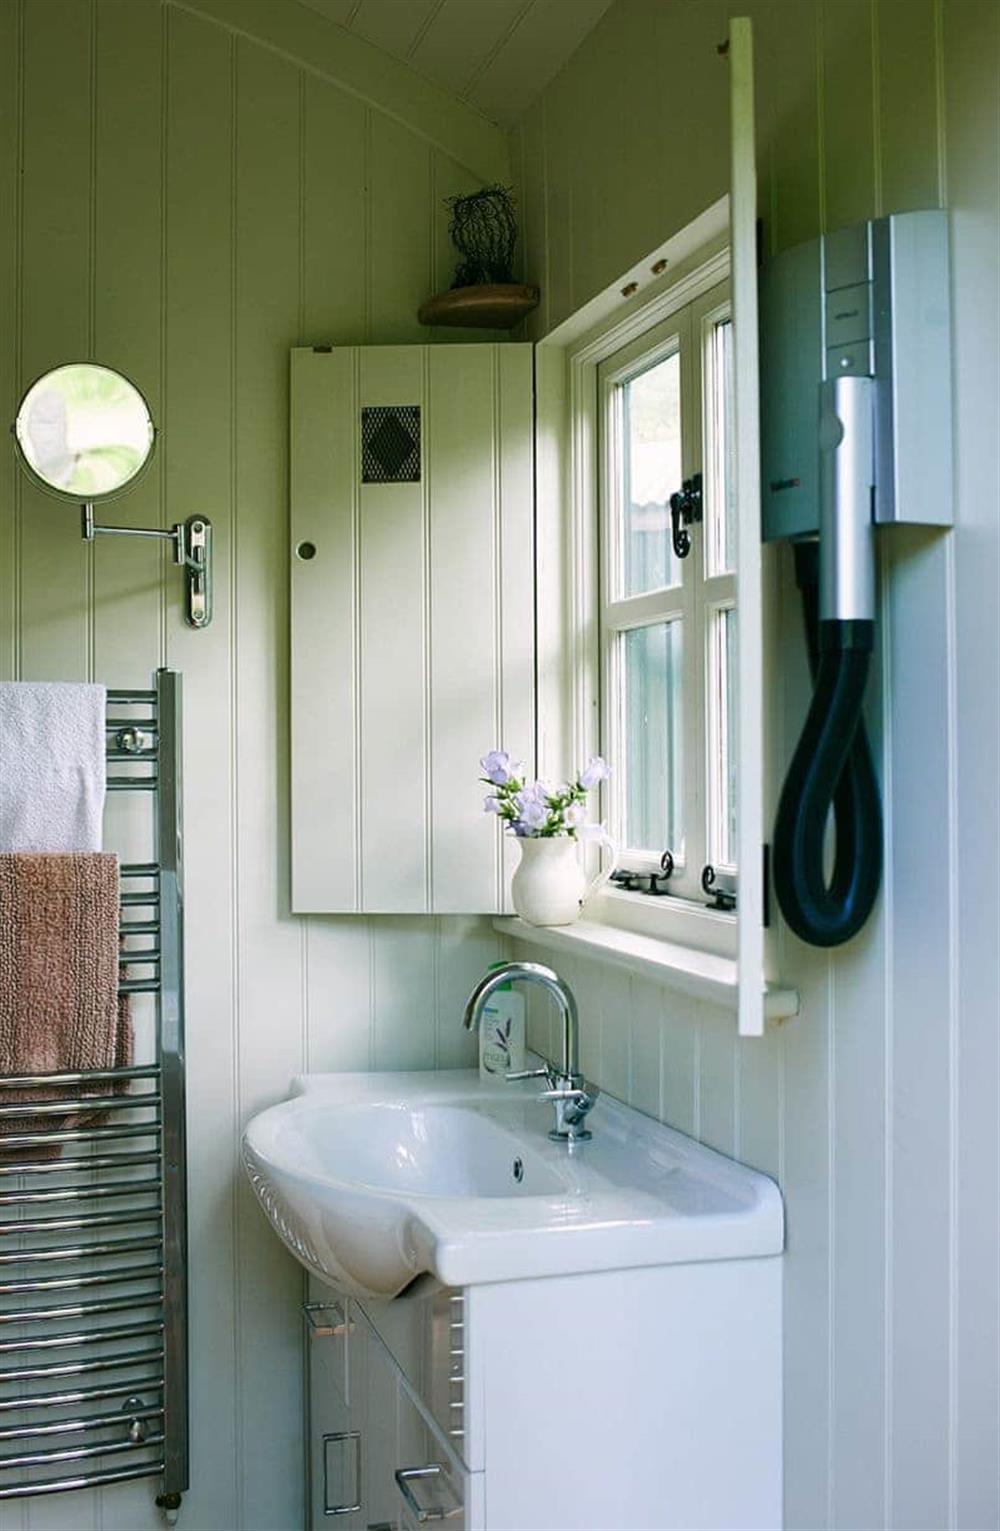 This is the bathroom at The Huts in the Hills in Hay On Wye, Powys